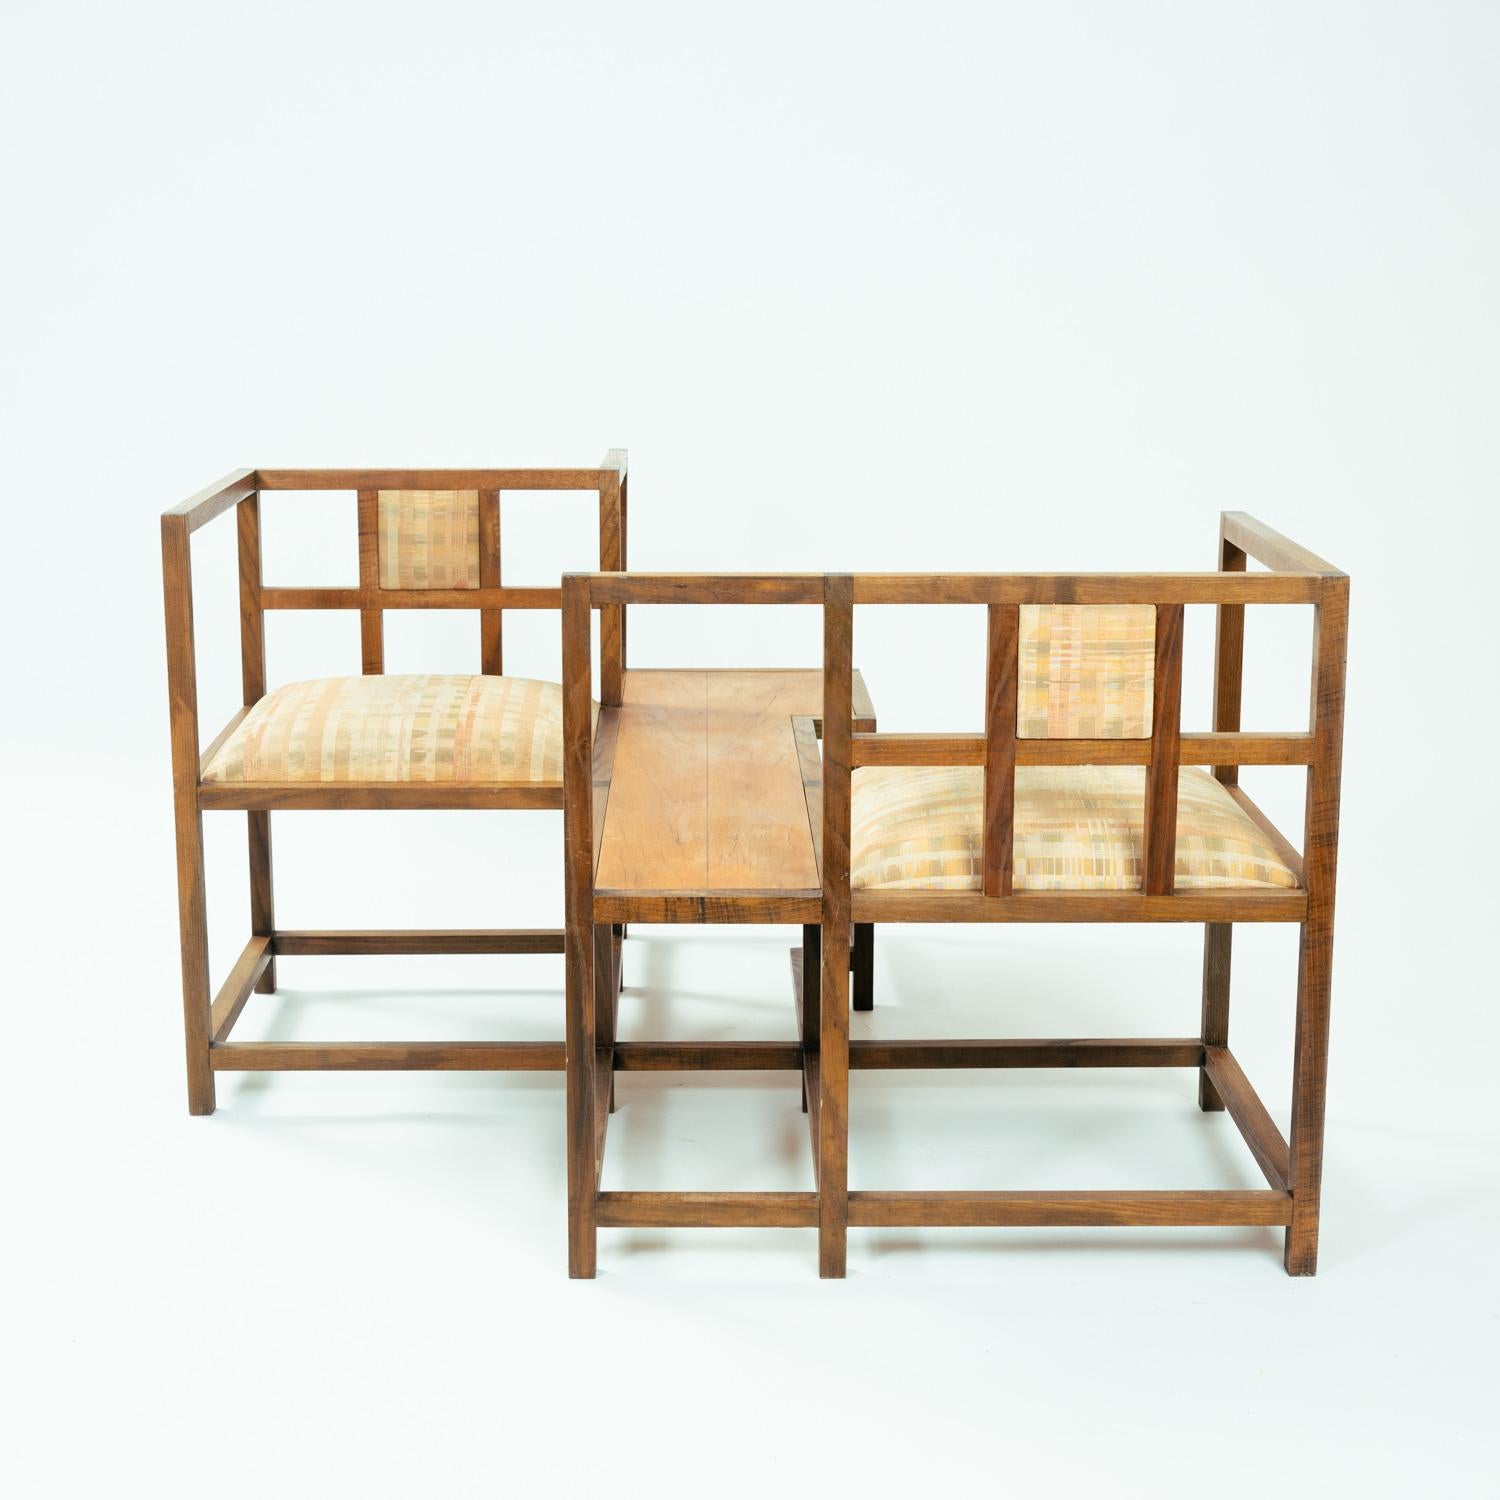 This unique and one of a kind Face to face or vis-a-vis seating arrangement in pearwood is designed by Menno Wieringa, who designed and built unique furniture in the 1970s -1990s under his own management and in his own workshop.
This design was